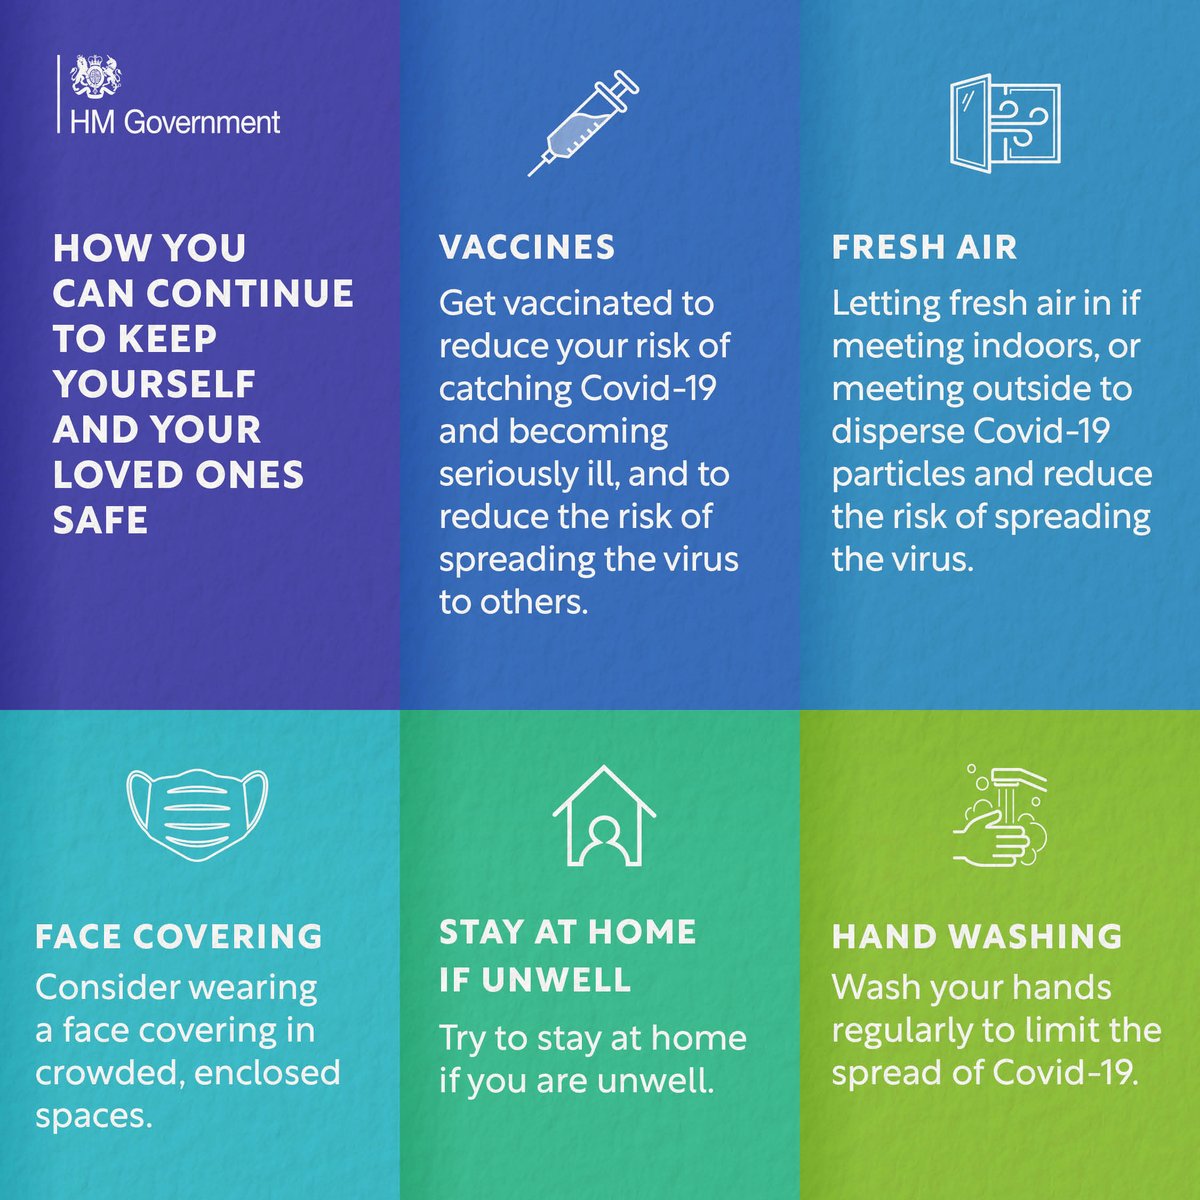 As we learn to live with Covid-19, here are some ways we can help protect us & loved ones 💉 #GetVaccinated or #GetBoosted 💨 Let fresh air & ventilate indoor spaces 😷 Wear a mask in crowded places 🤒 Stay at home if you're feeling unwell 💧 Wash your hands regularly